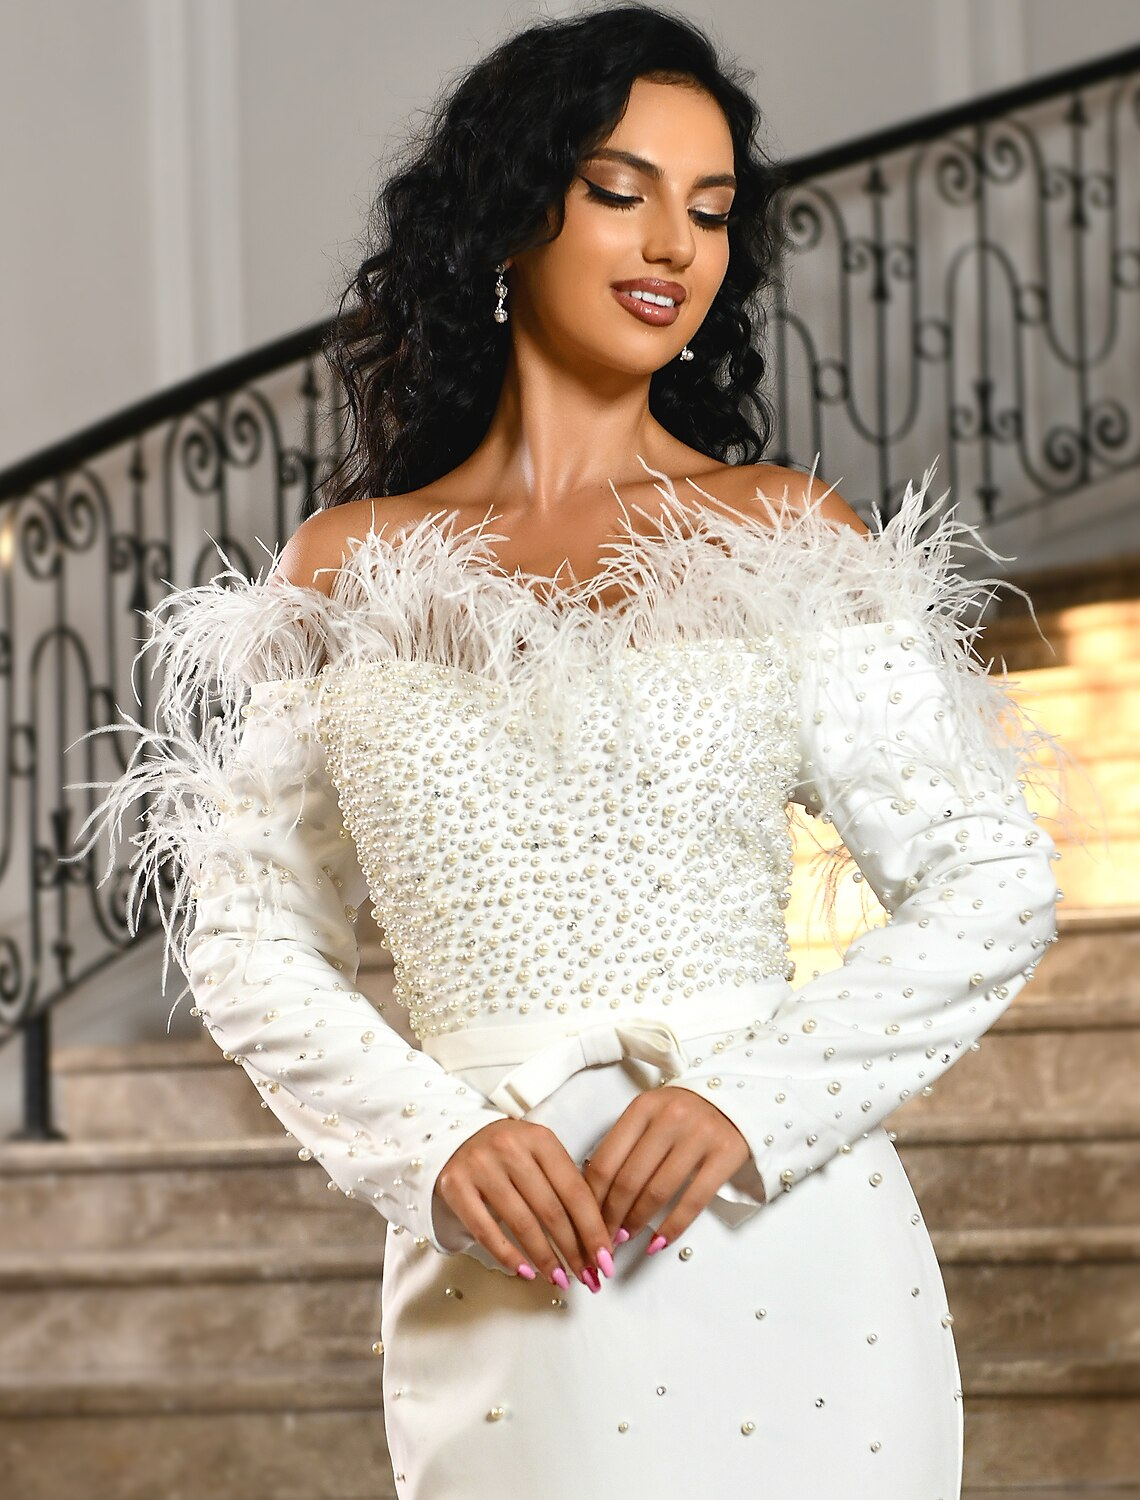 Engagement Formal Wedding Dresses Floor Length Long Sleeve Off Shoulder Stretch Fabric With Bow(s)